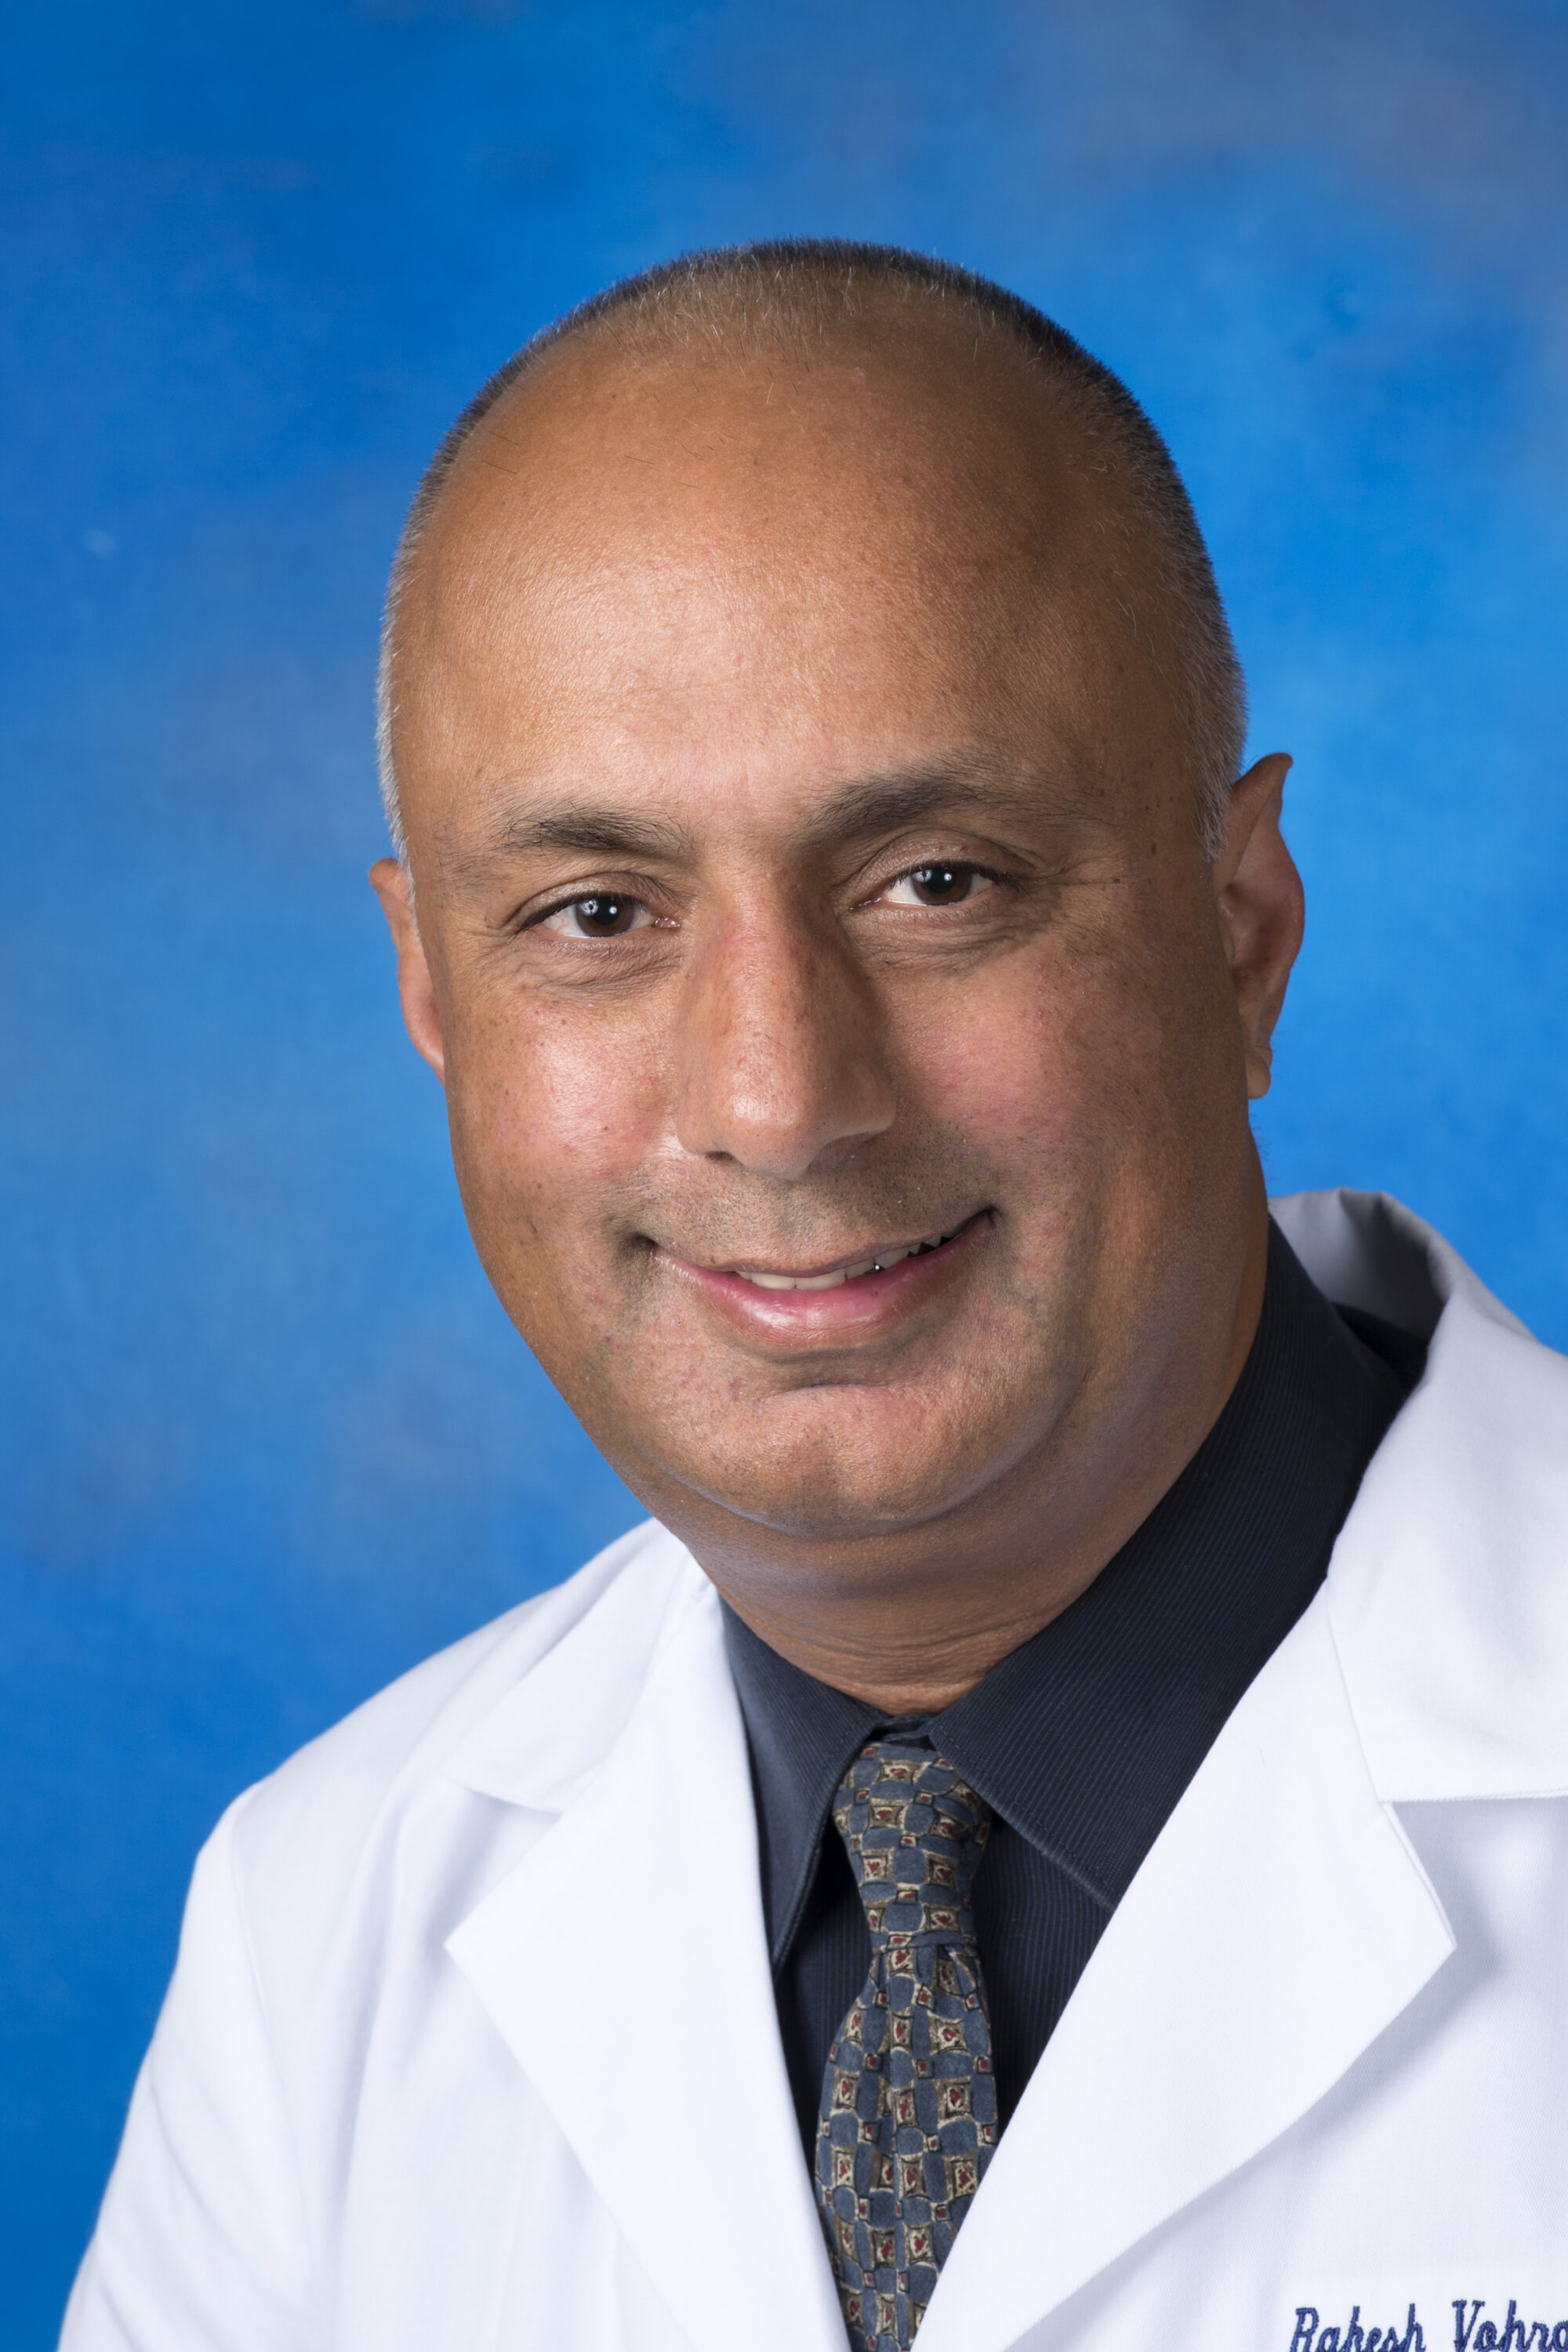 Join fellowship-trained cardiologist, Dr. Rakesh Vohra for February’s Health Night on the Town program - Tuesday, February 27, 7:00 p.m. in Methodist's Ridge Conference Room.